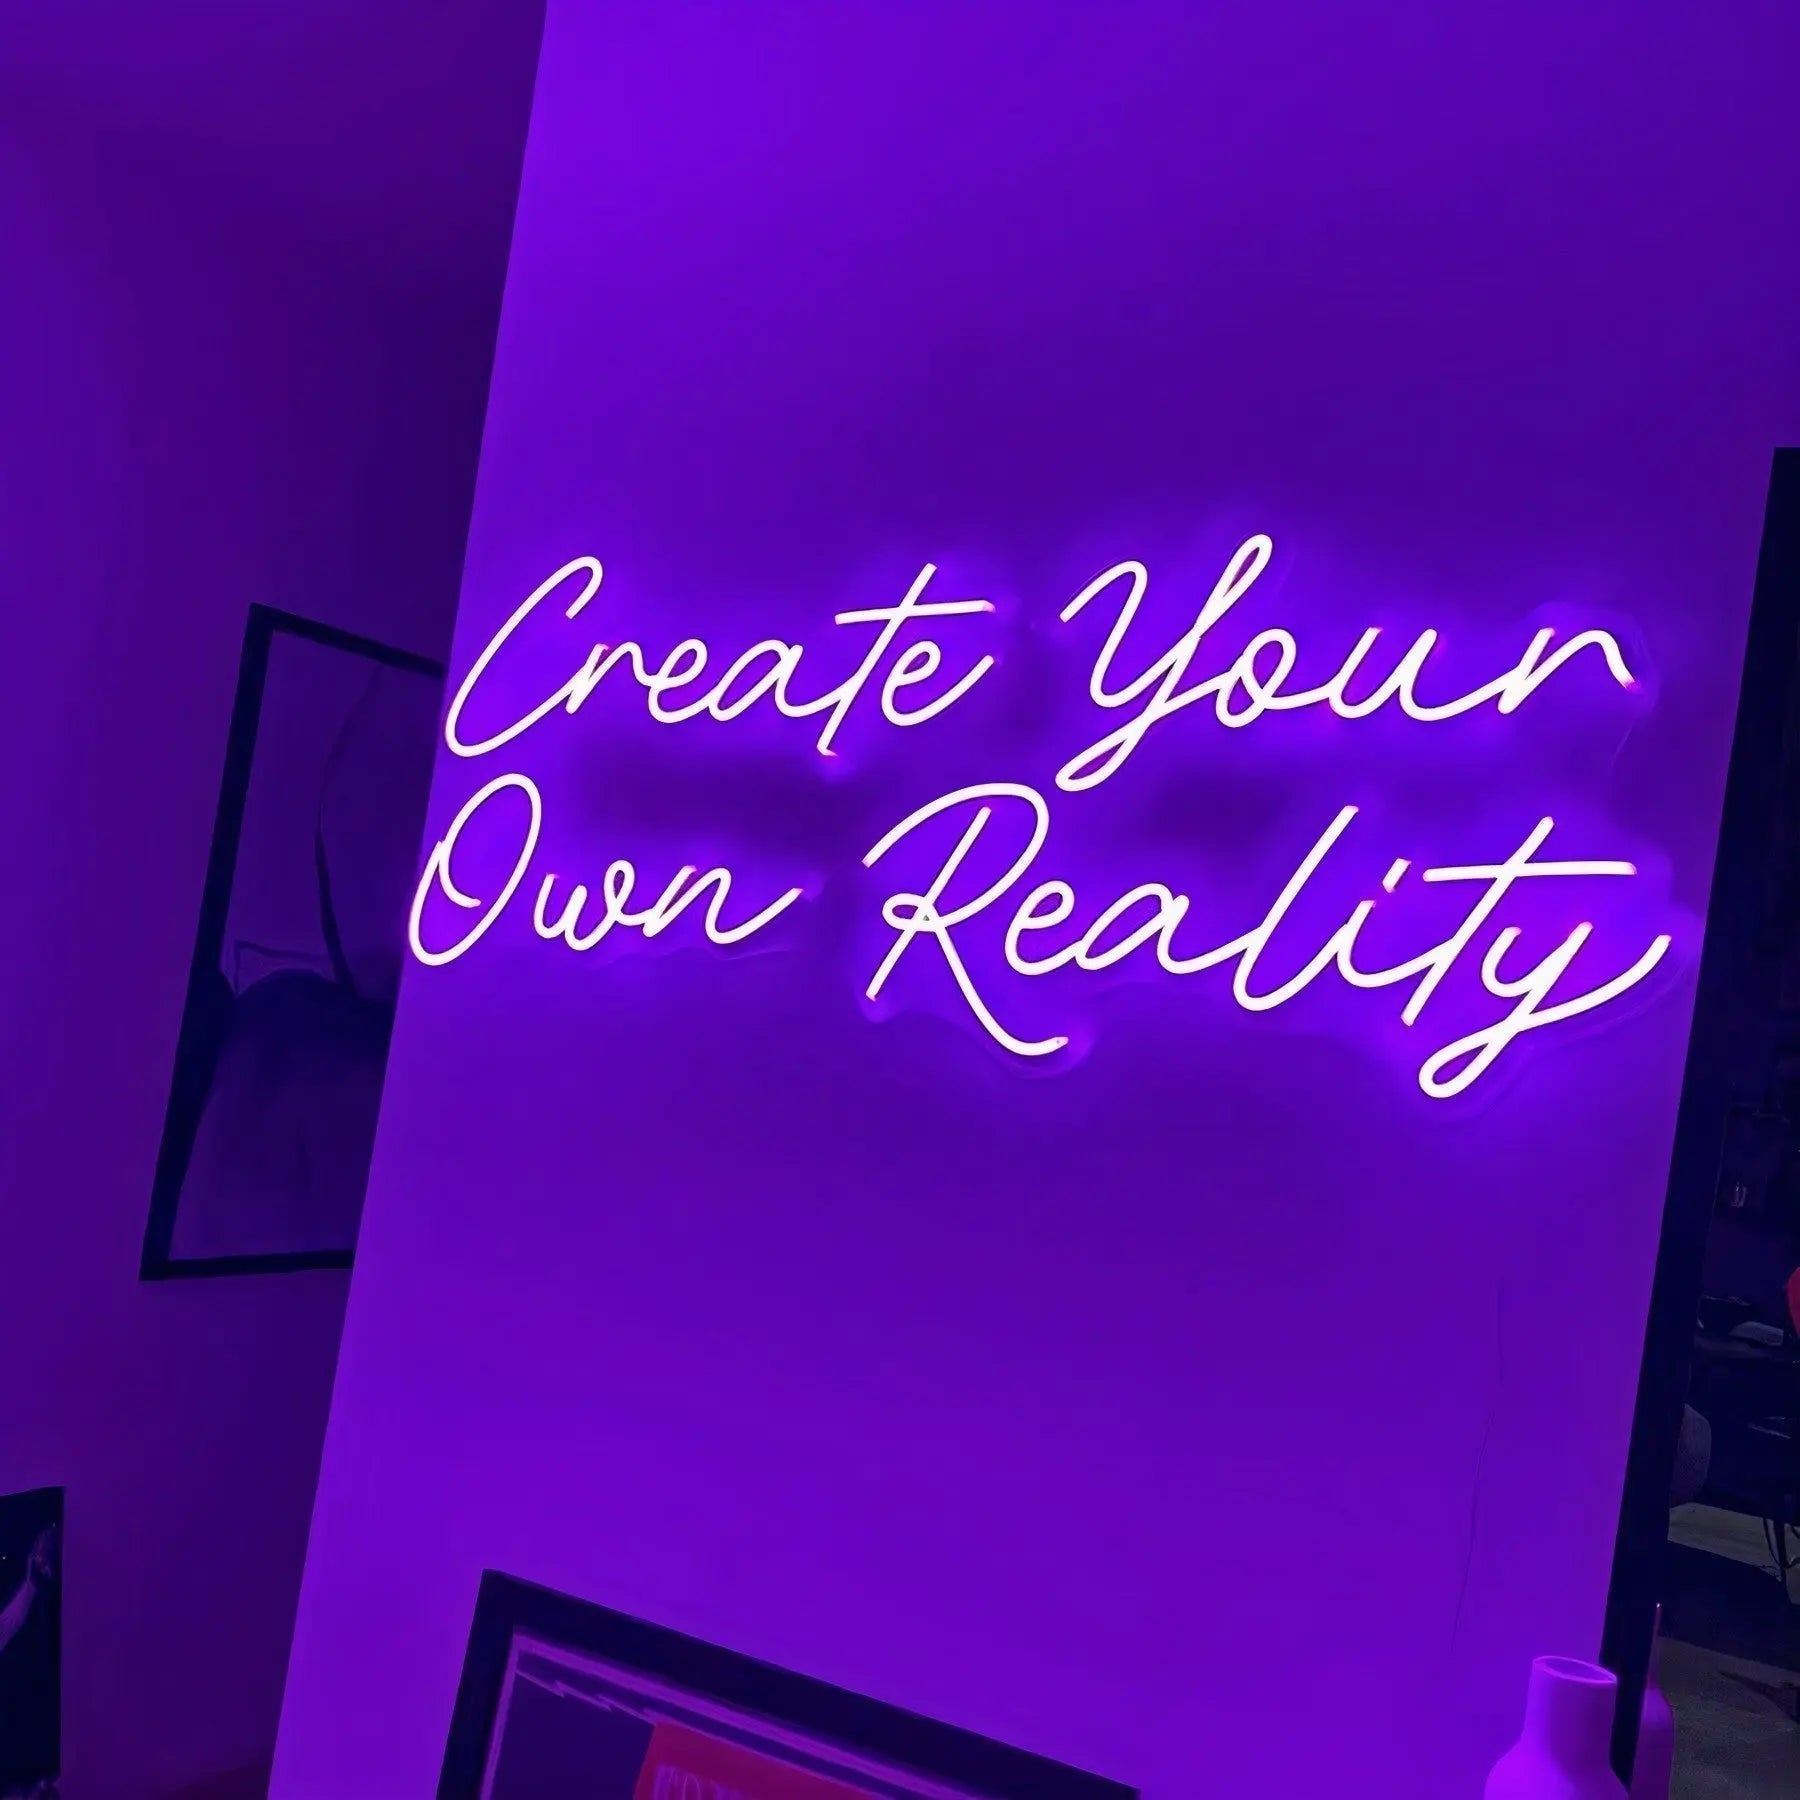 'Create Your Own Reality' LED Neon Sign - neonaffair